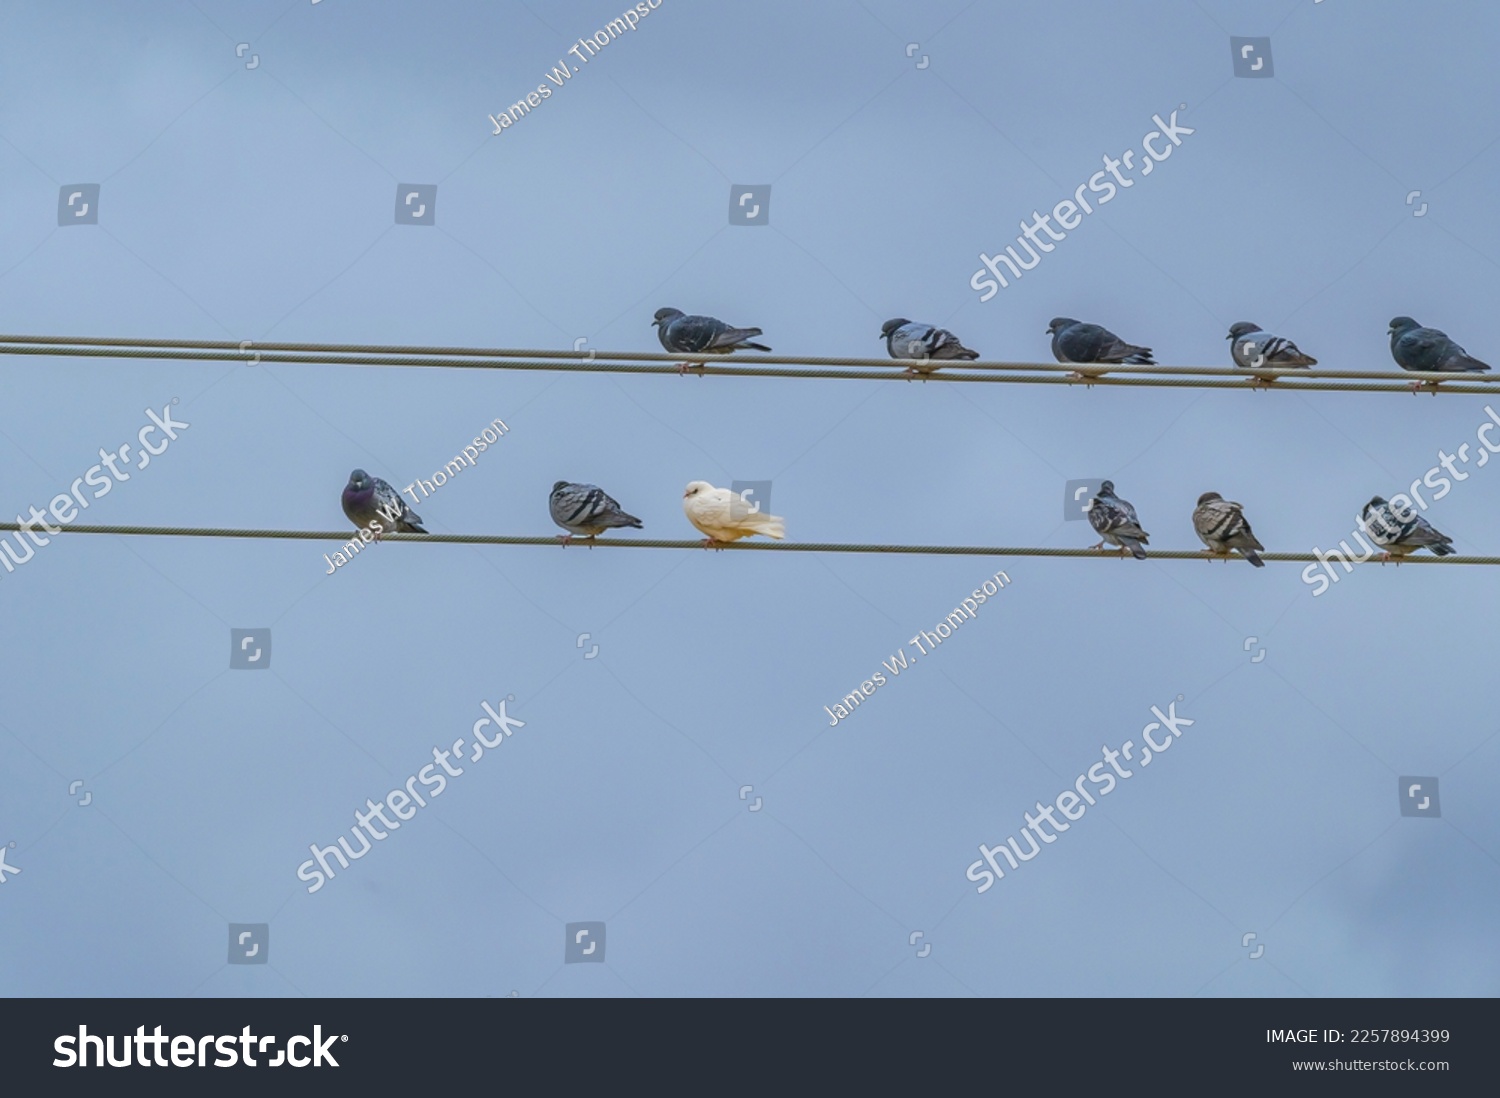 One white rock pigeon sits on wire with a group of other rock pigeons, in Fenton Township, Michigan. #2257894399